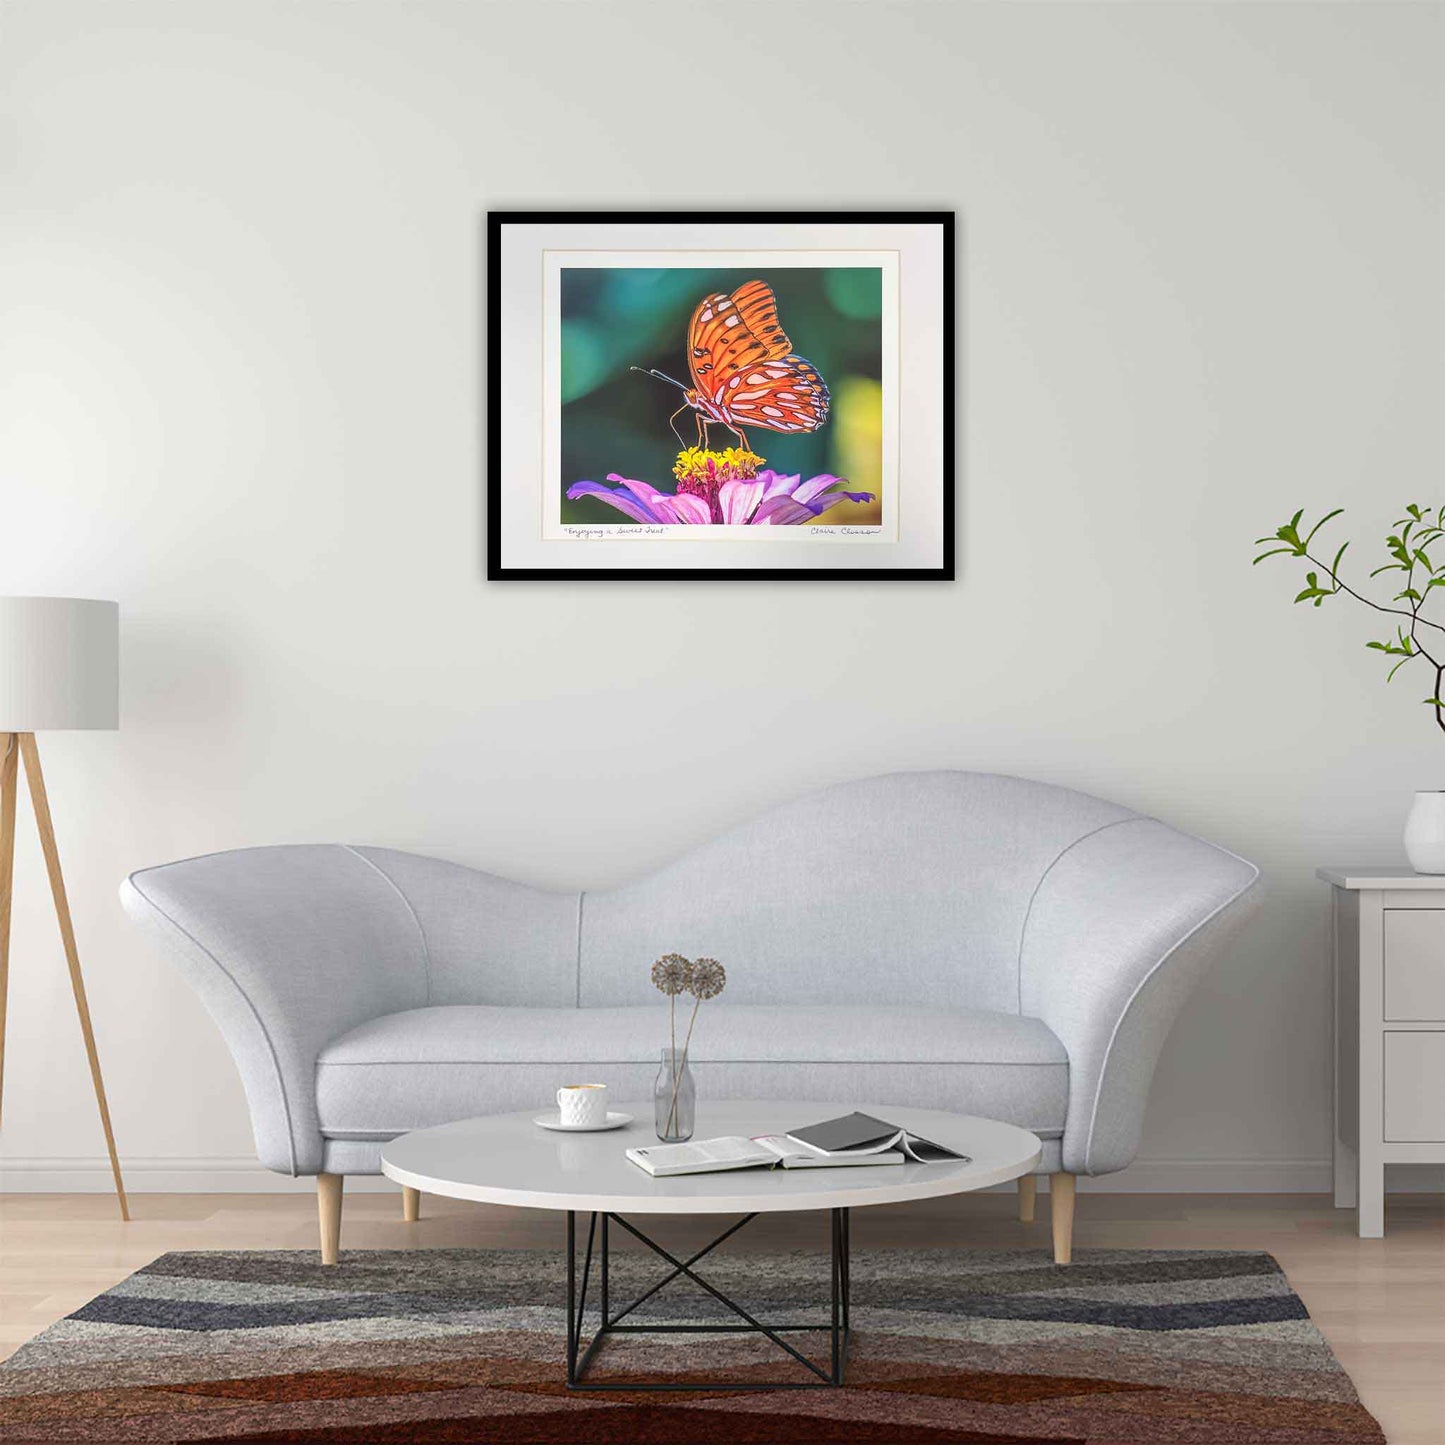 ECC “Enjoying a Sweet Treat” Matted Photographic Print by Photographer Claire Closson. Shows a beautiful Gulf Fritillary Butterfly. Photographed in Leu Gardens. Orange, white and black butterfly on a purple and yellow cosmos. Subtle green background. Ready to be framed. Wildlife phtography. 11X14